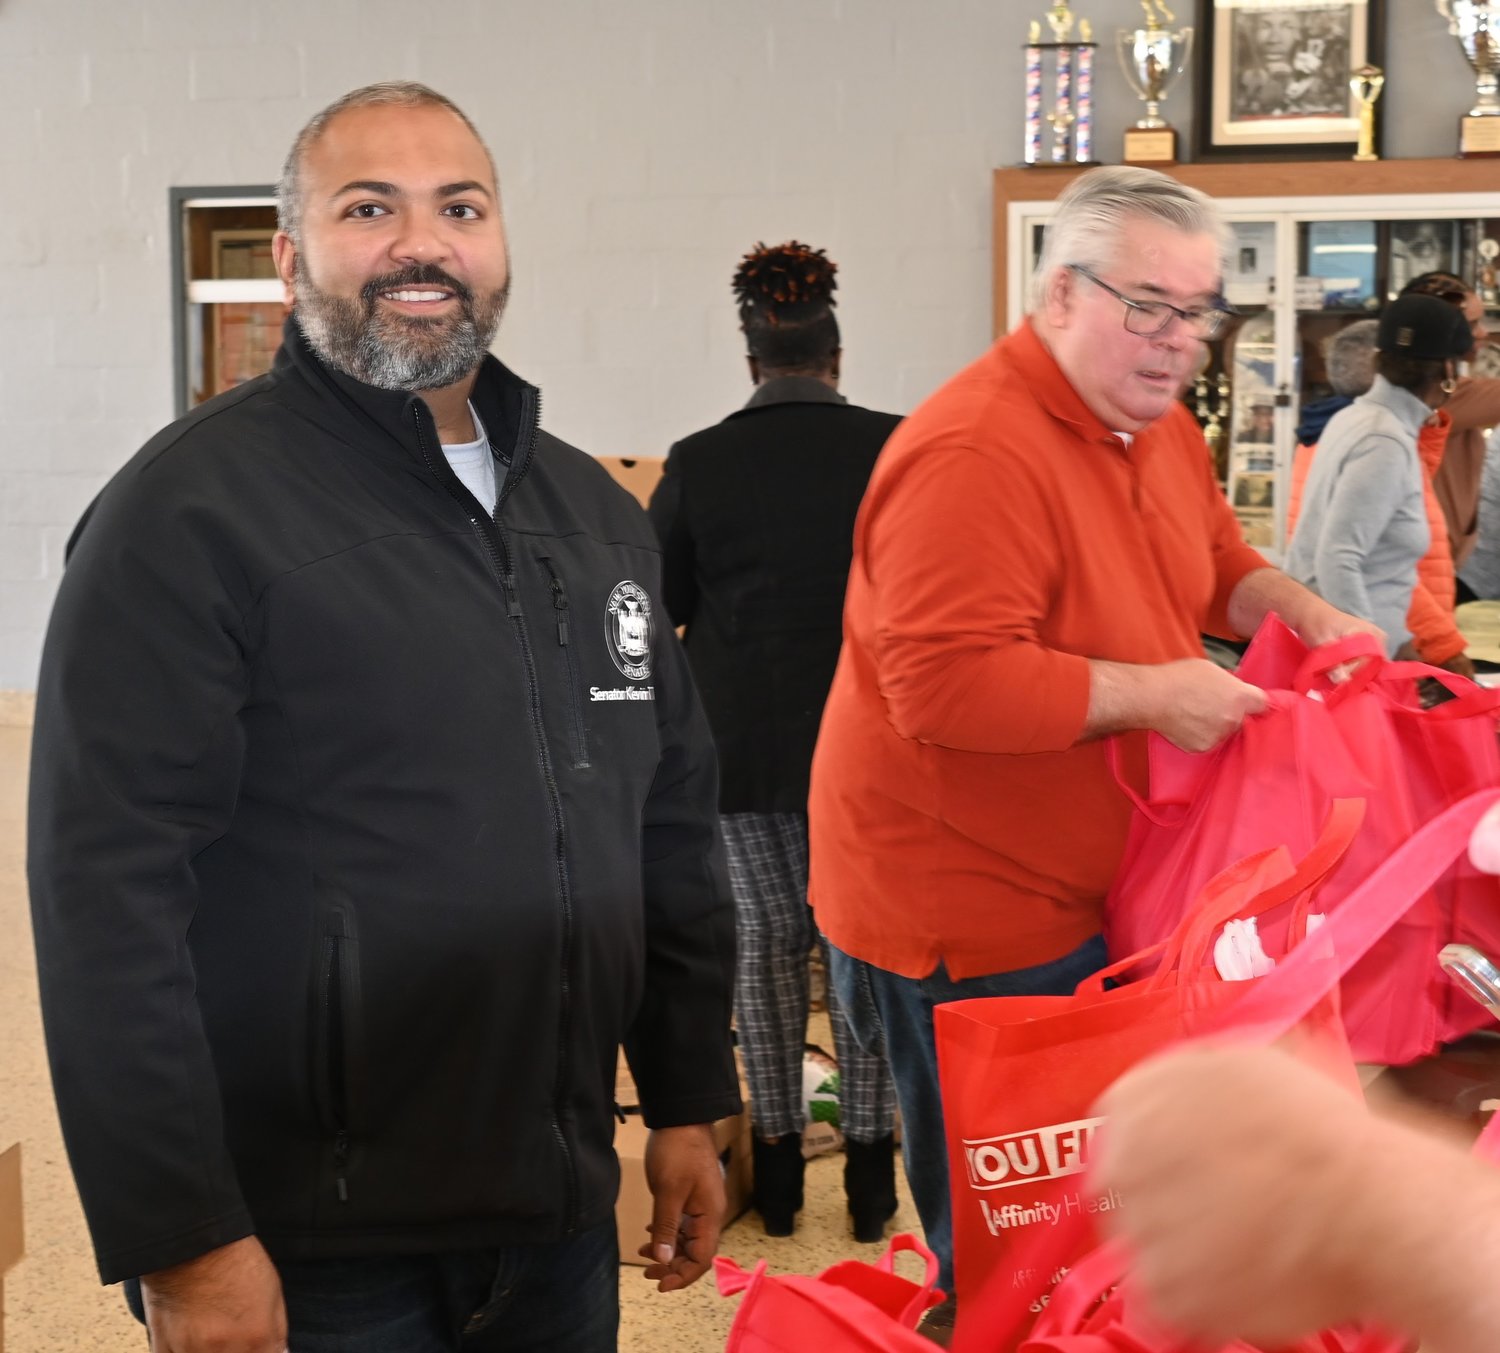 Senator Kevin Thomas helped bag and distribute the turkeys at the Hempstead Annual Turkey Giveaway 2022 at Kennedy Park.